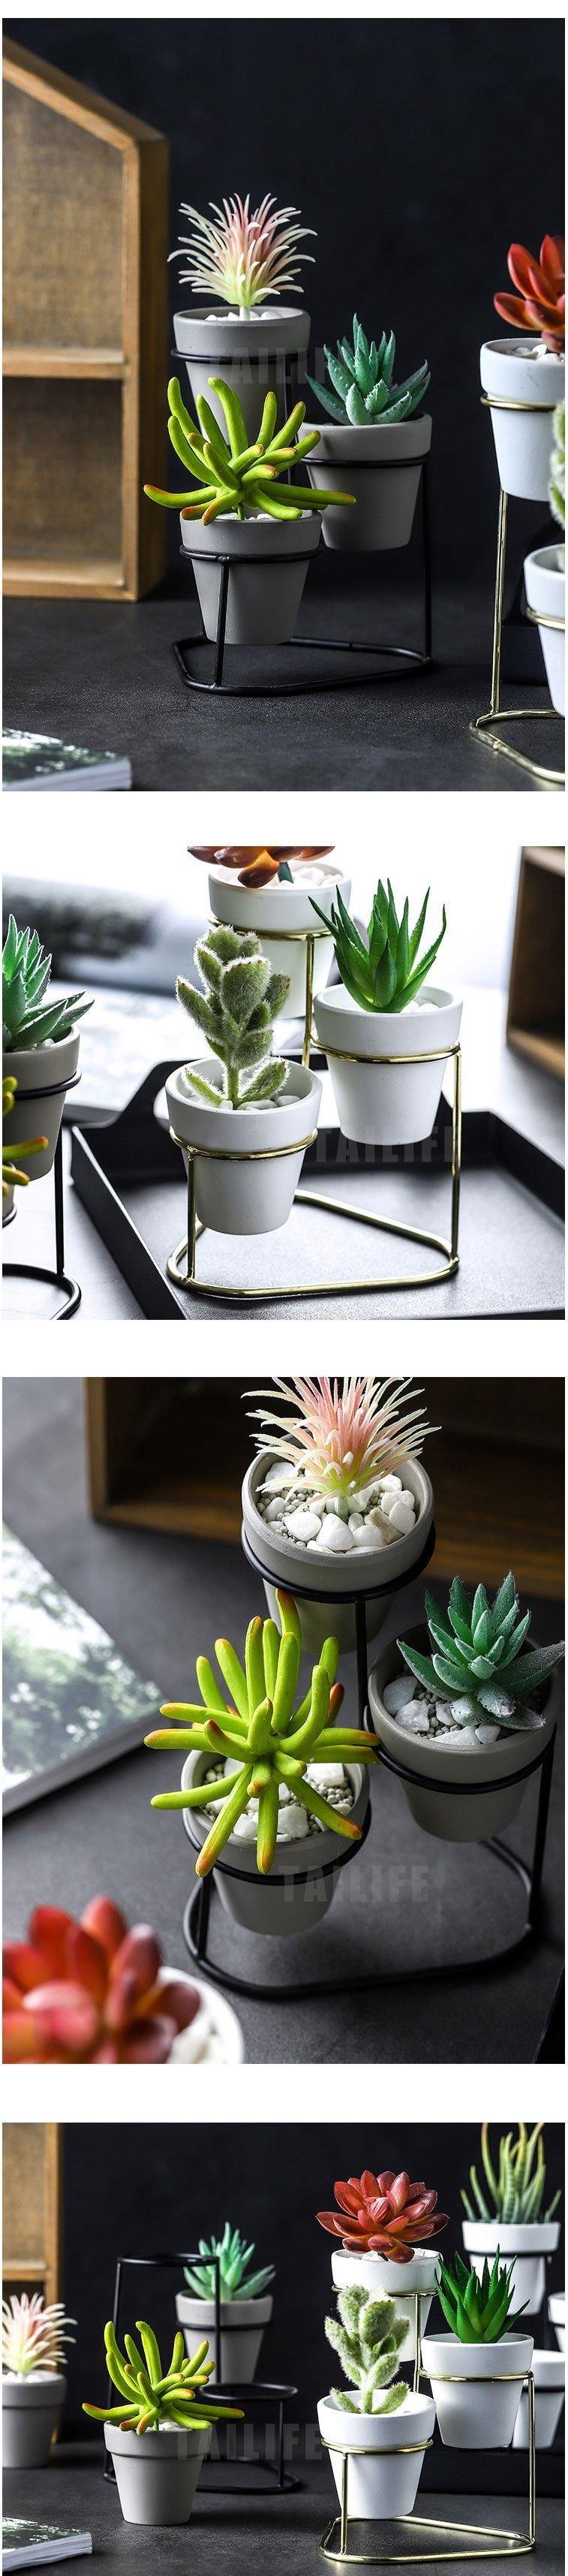 3Pcs Nordic style Coarse Pottery Ceramics Gold Iron Vase Tabletop Flowerpot Home Wedding Decoration Accessories For Flower Plant - Nordic Side - 